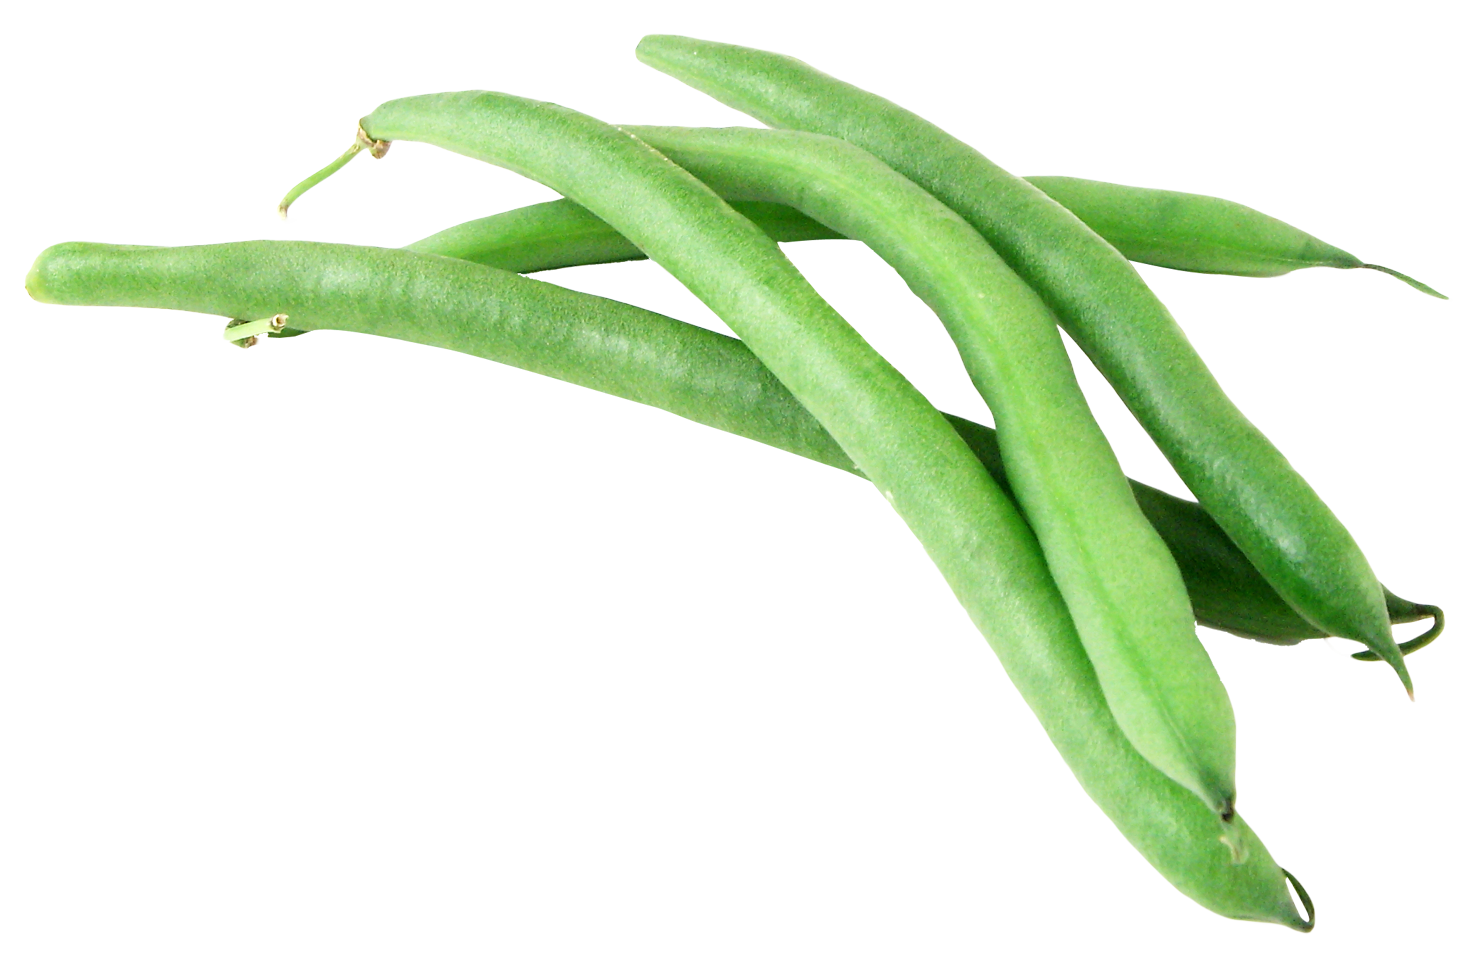 Green beans are eaten around the world and are sold fresh, canned, and froz...